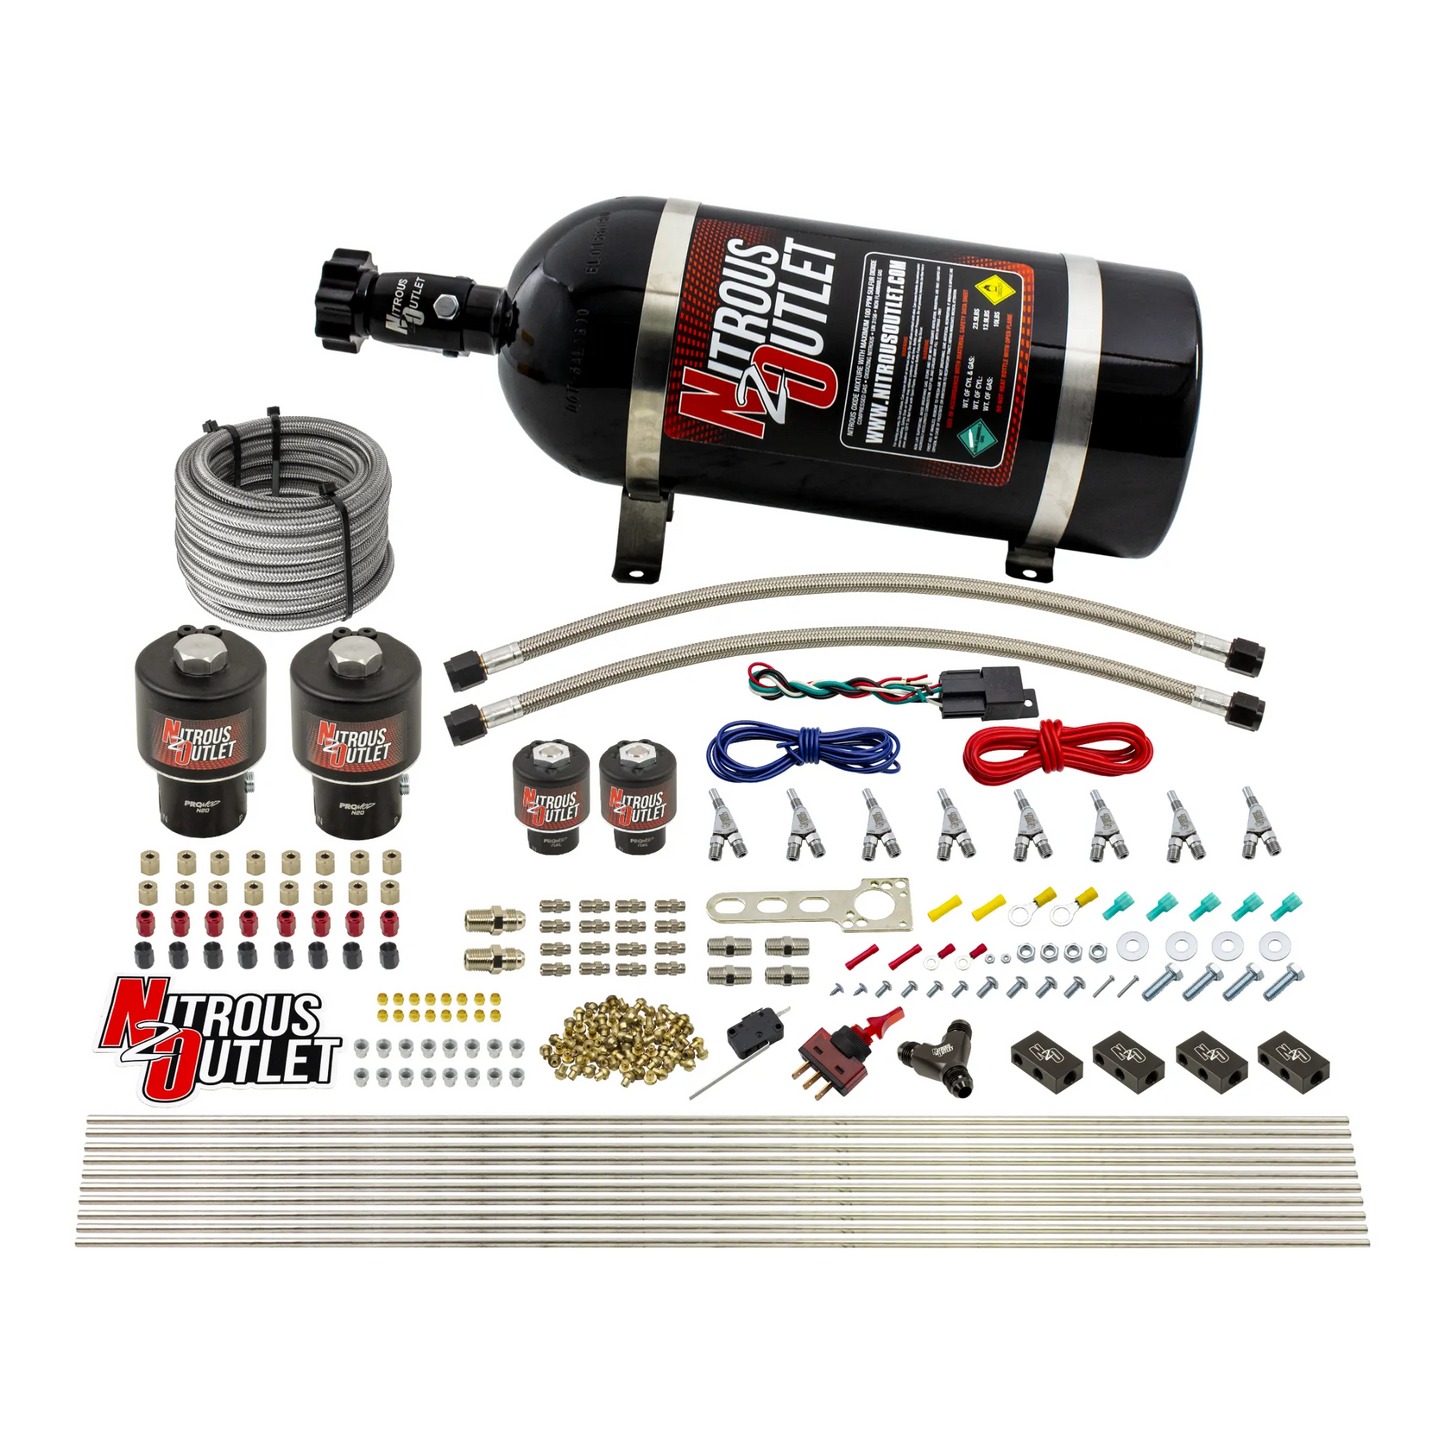 8 Cylinder Single Stage Direct Port Nitrous System - .178 Nitrous/.177 Fuel Solenoids - Alcohol - Straight Blow Through Nozzles